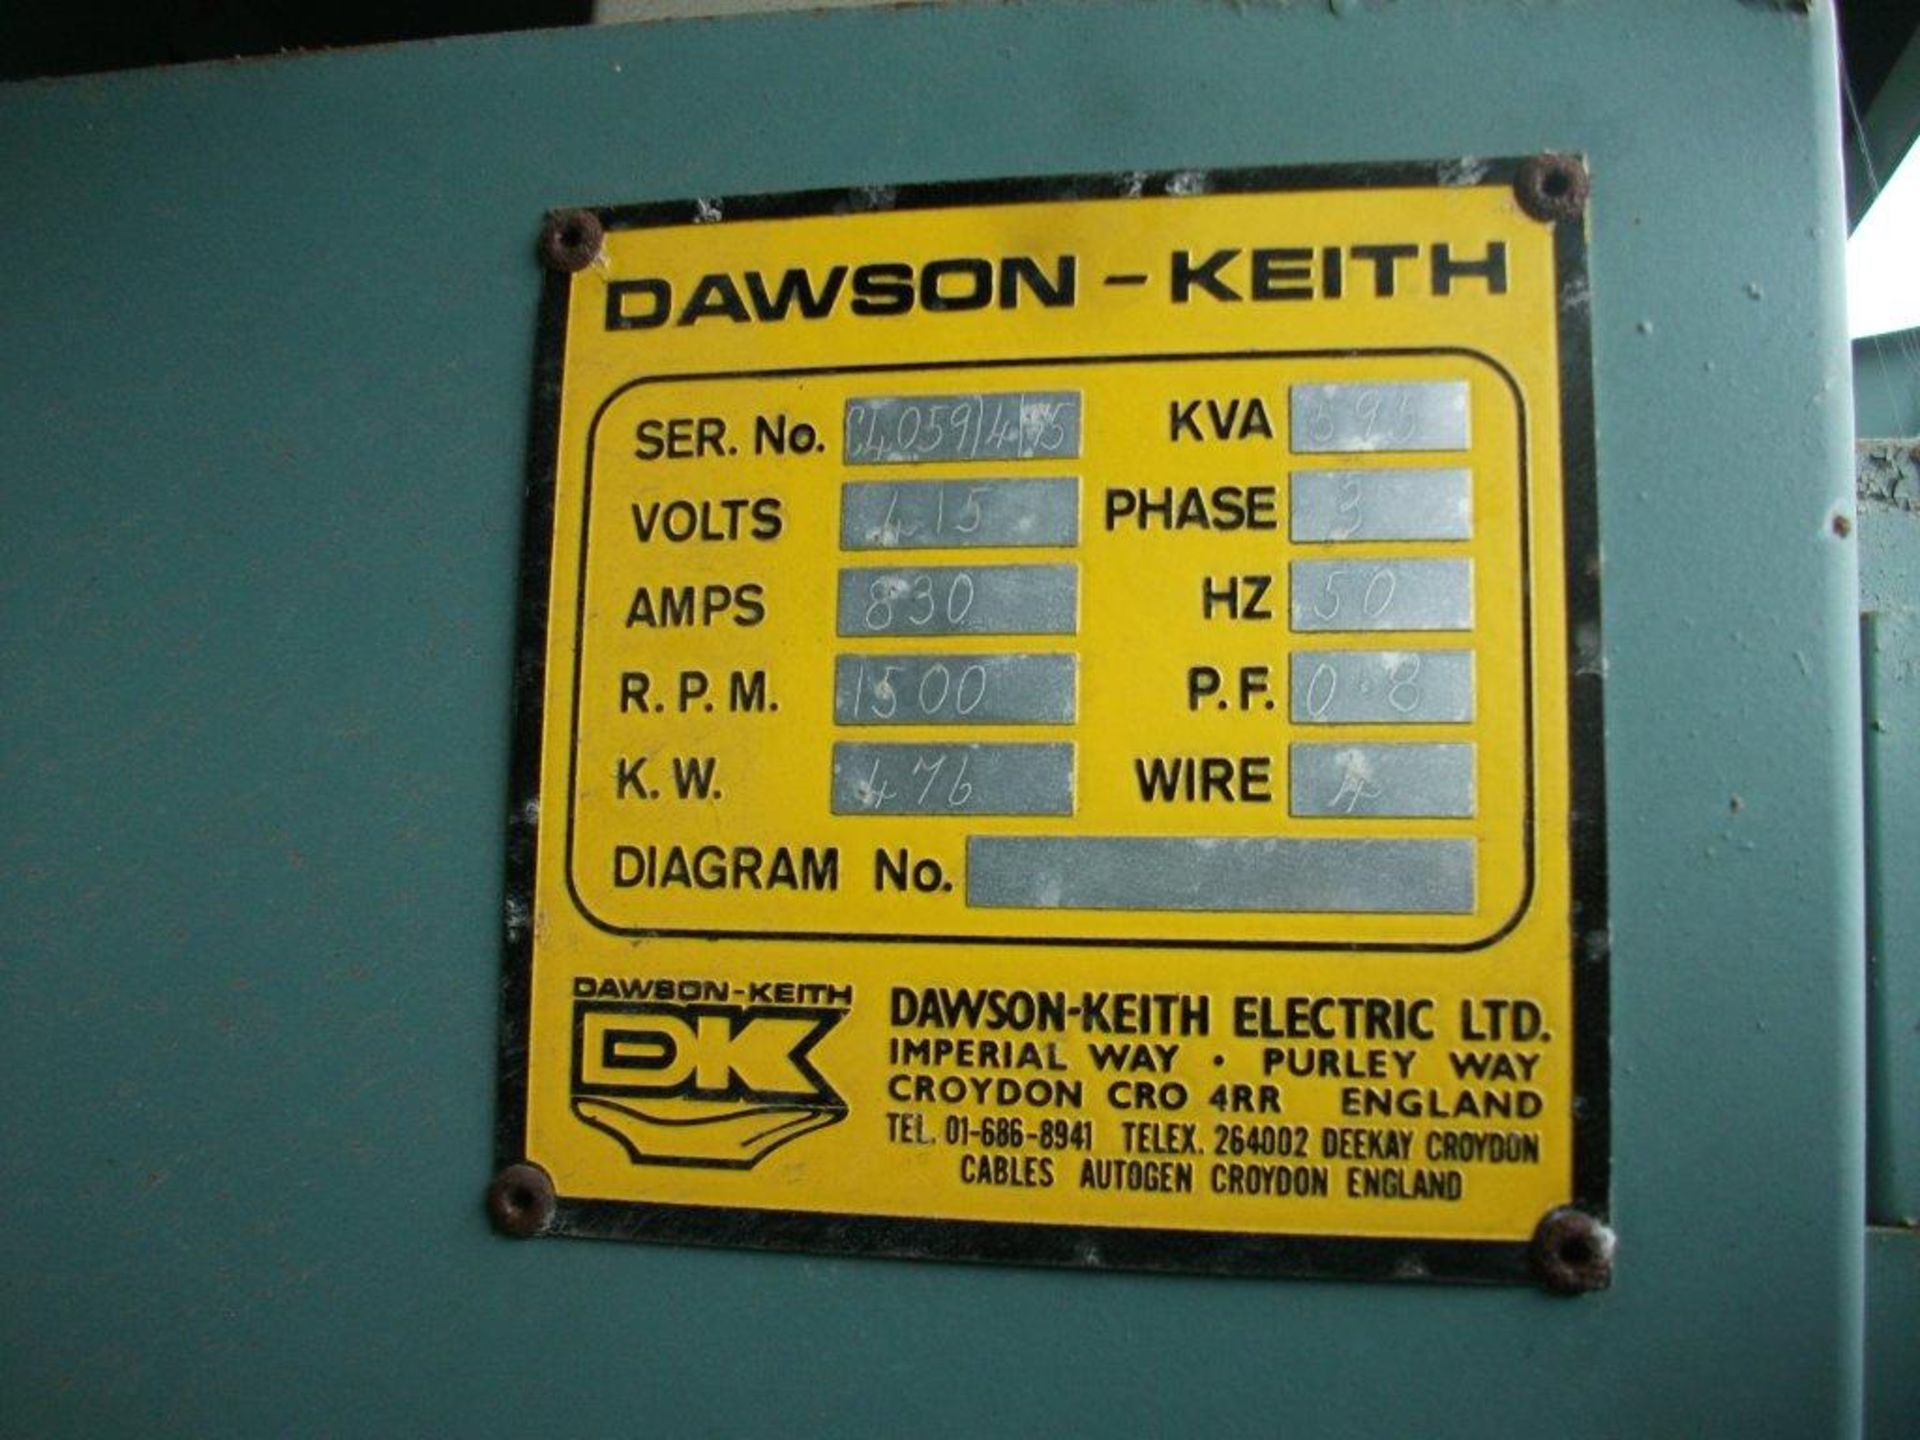 Dawson Keith 595 Kva 3 Phase Generator - S/n: C4059/4/15 - Hours: 339 S/n: C4059/4/15 Hours: 339 - Image 8 of 8